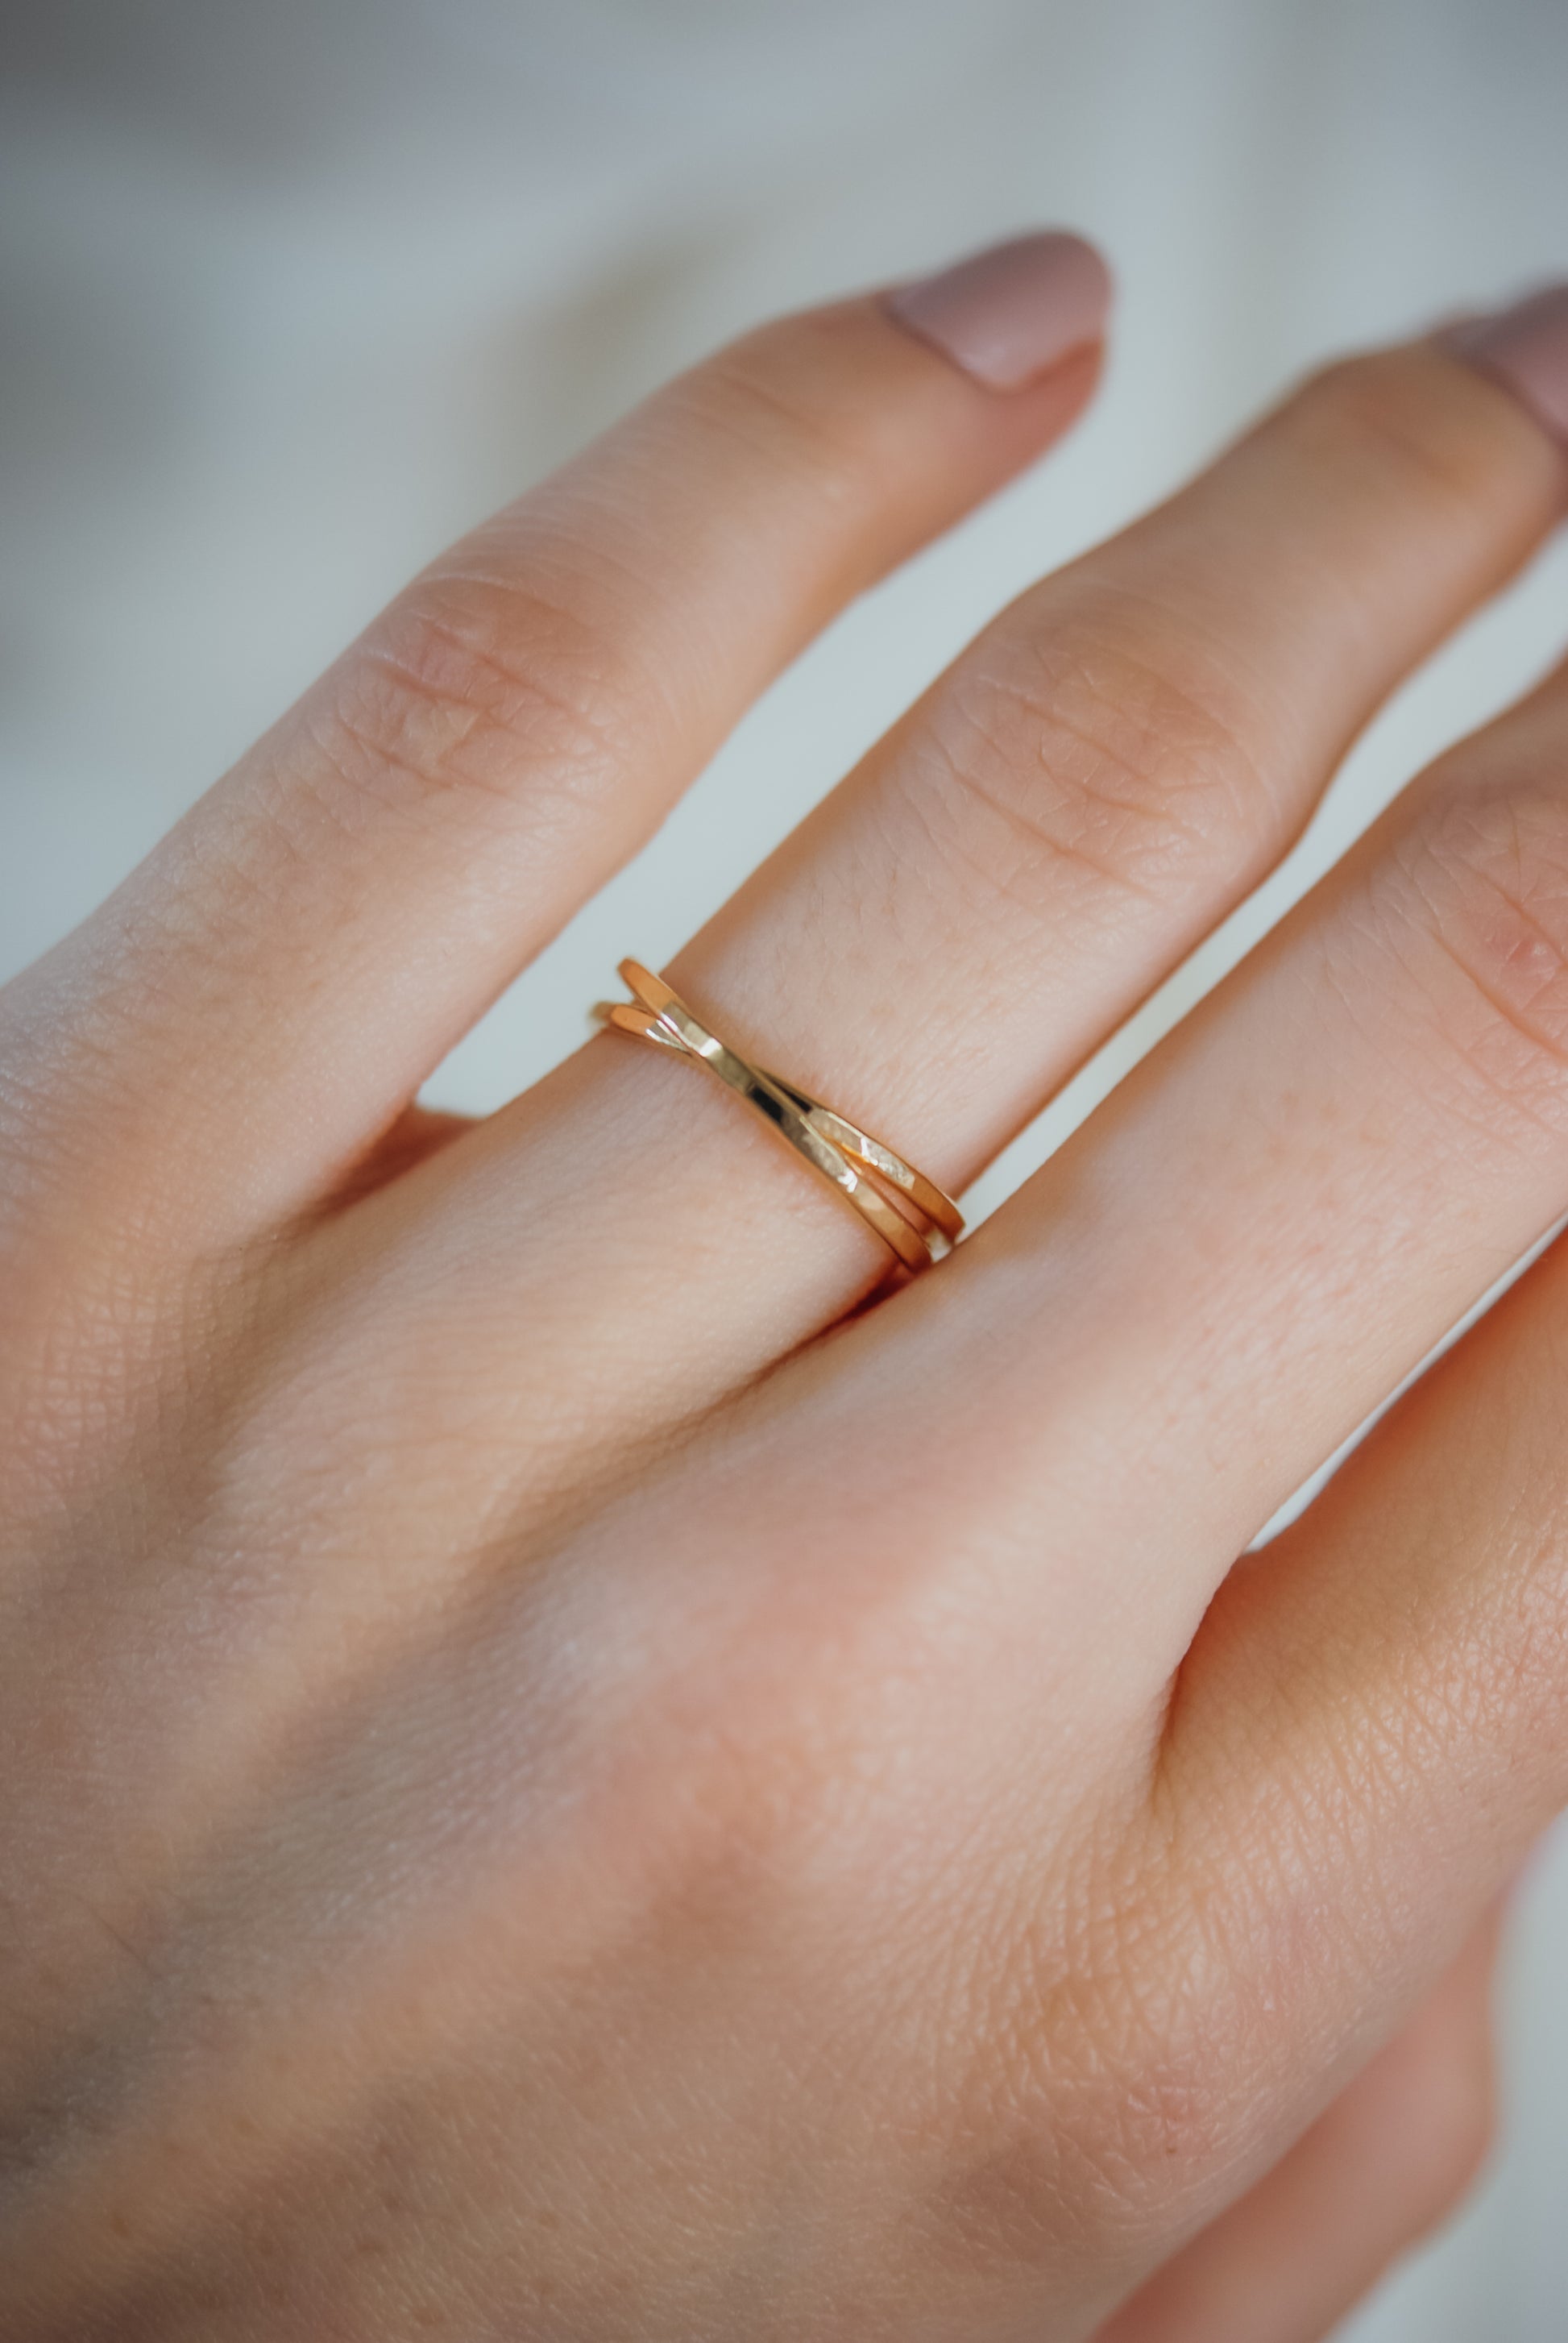 14kt Gold Filled Thin Gold Ring, Midi Ring, Stackable Ring Gold, Minimalist  Rings for Women, Gifts for Women, Thin Gold Band Gift for Her 